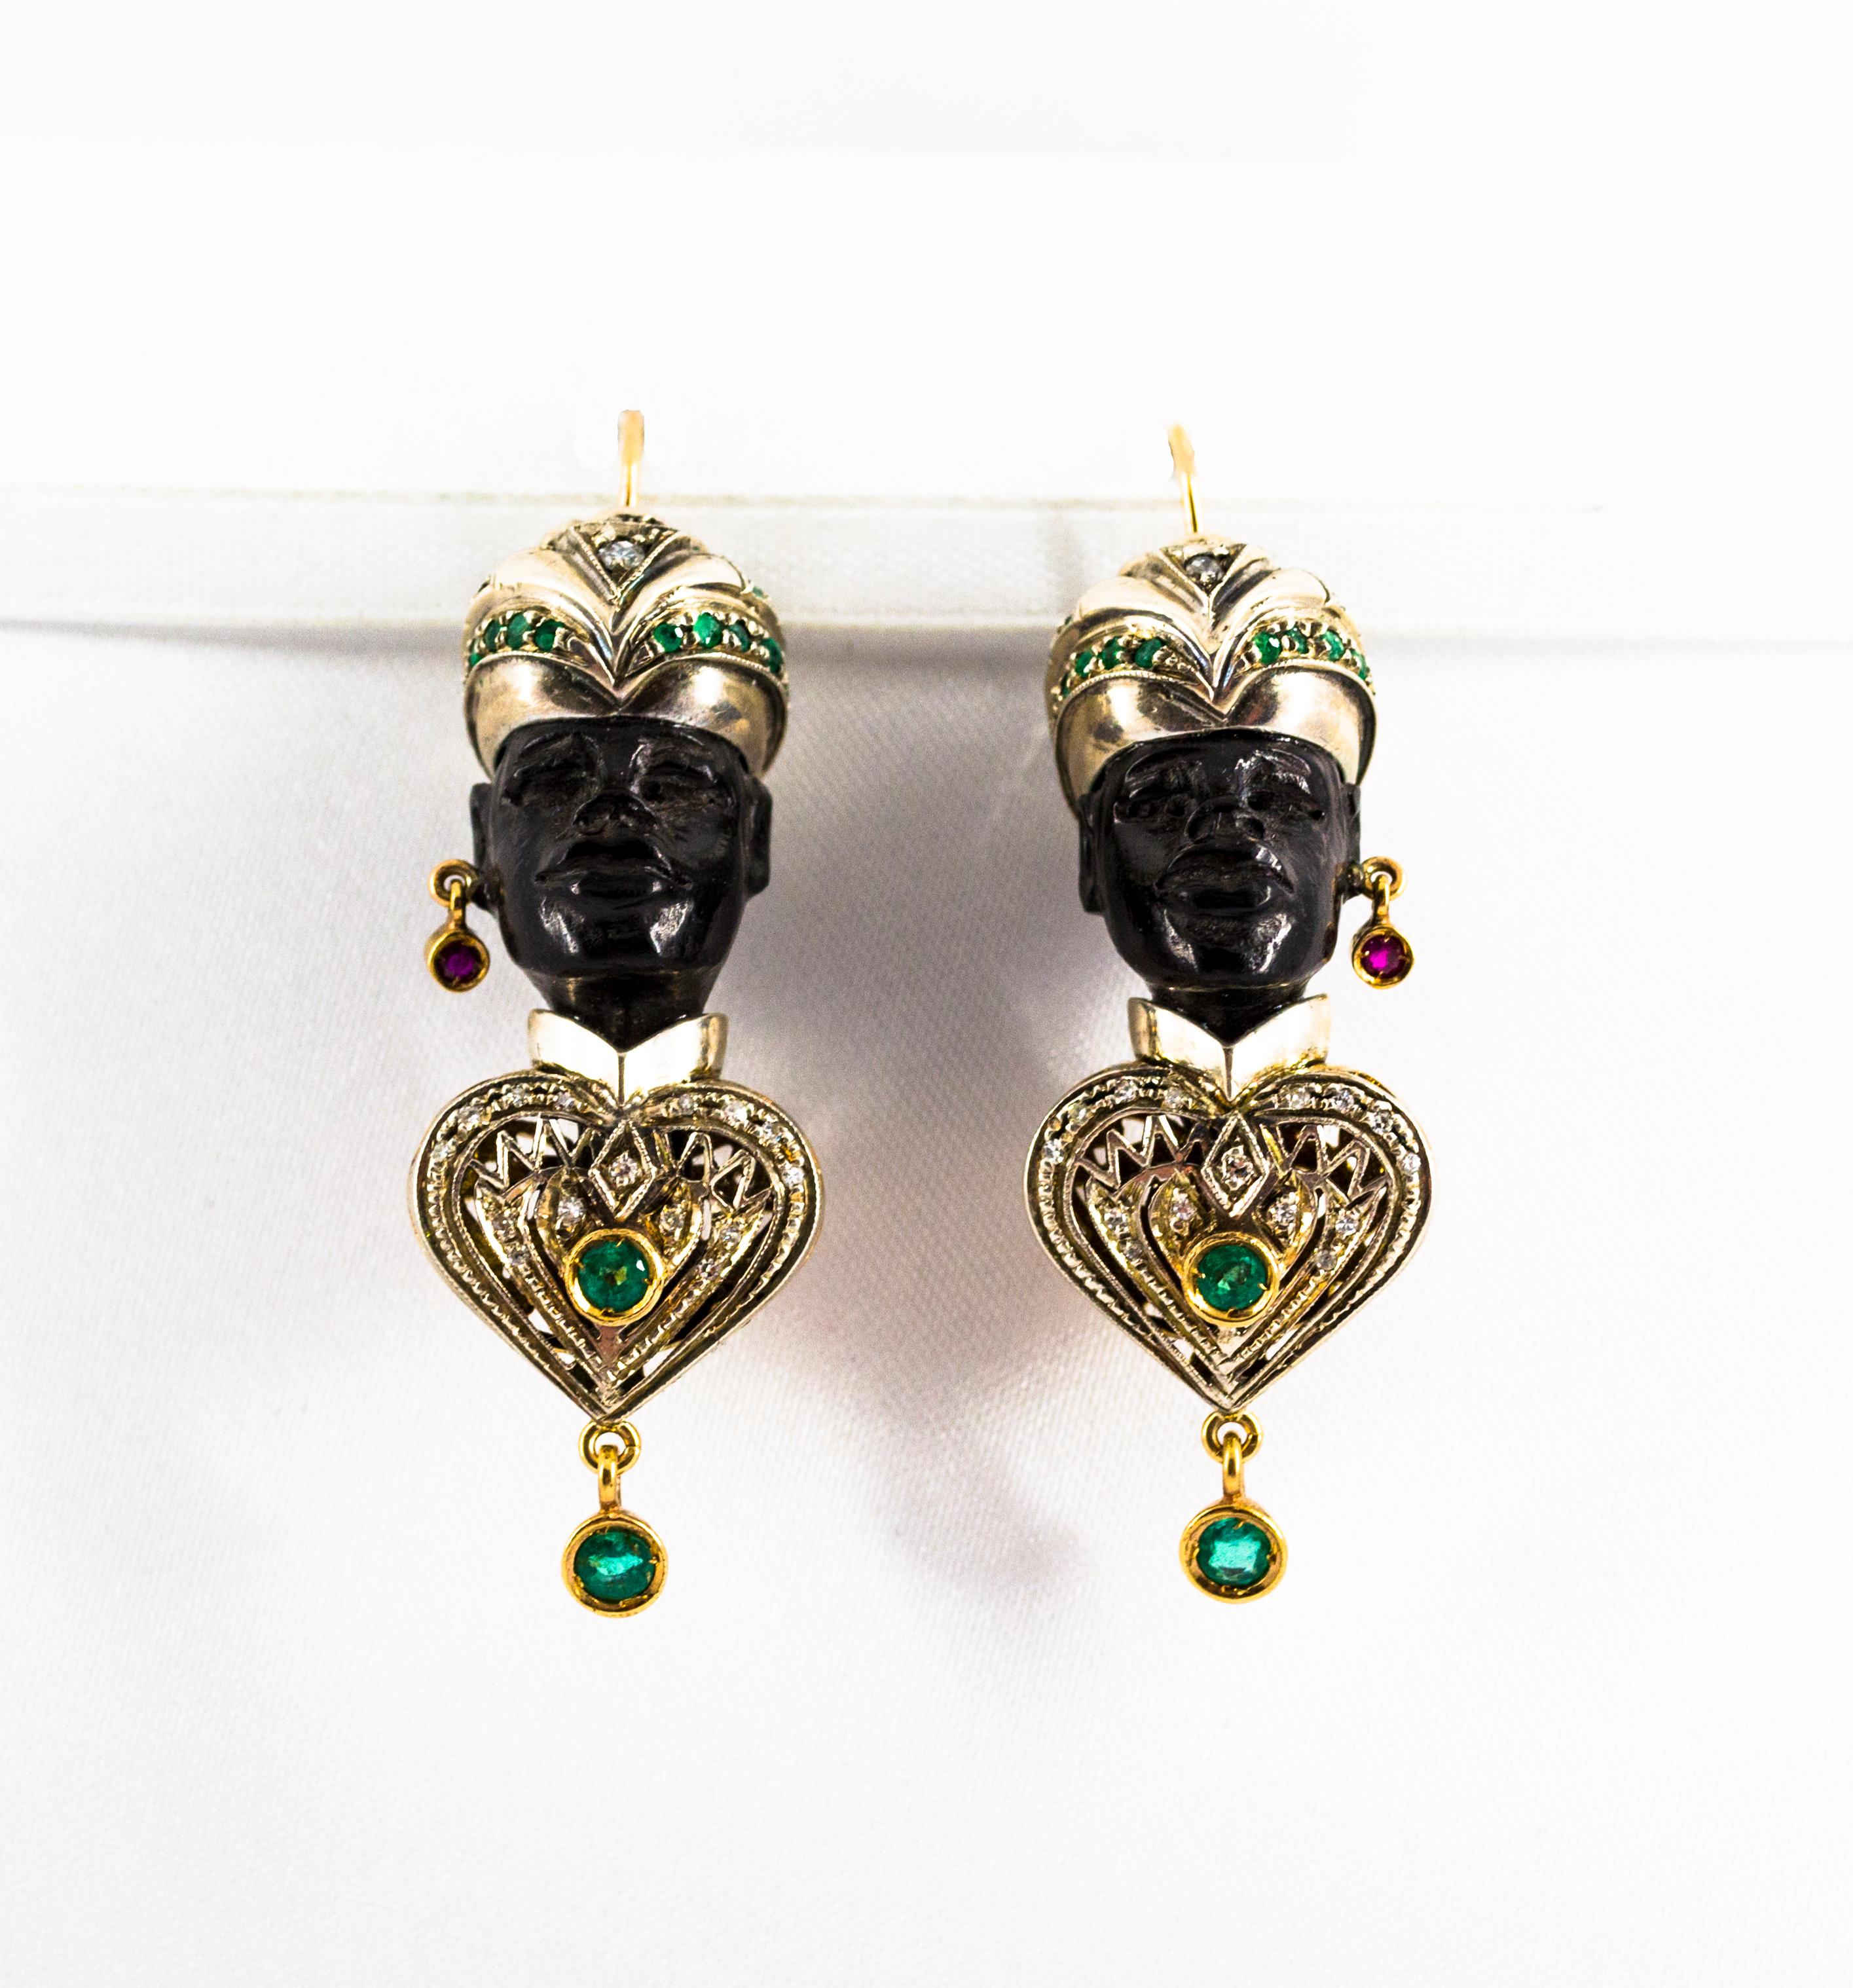 These Earrings are made of 9K Yellow Gold and Sterling Silver.
These Earrings have 0.20 Carats of White Diamonds.
These Earrings have 2.00 Carats of Emeralds.
These Earrings have 0.10 Carats of Rubies.
These Earrings have also Ebony.
We're a